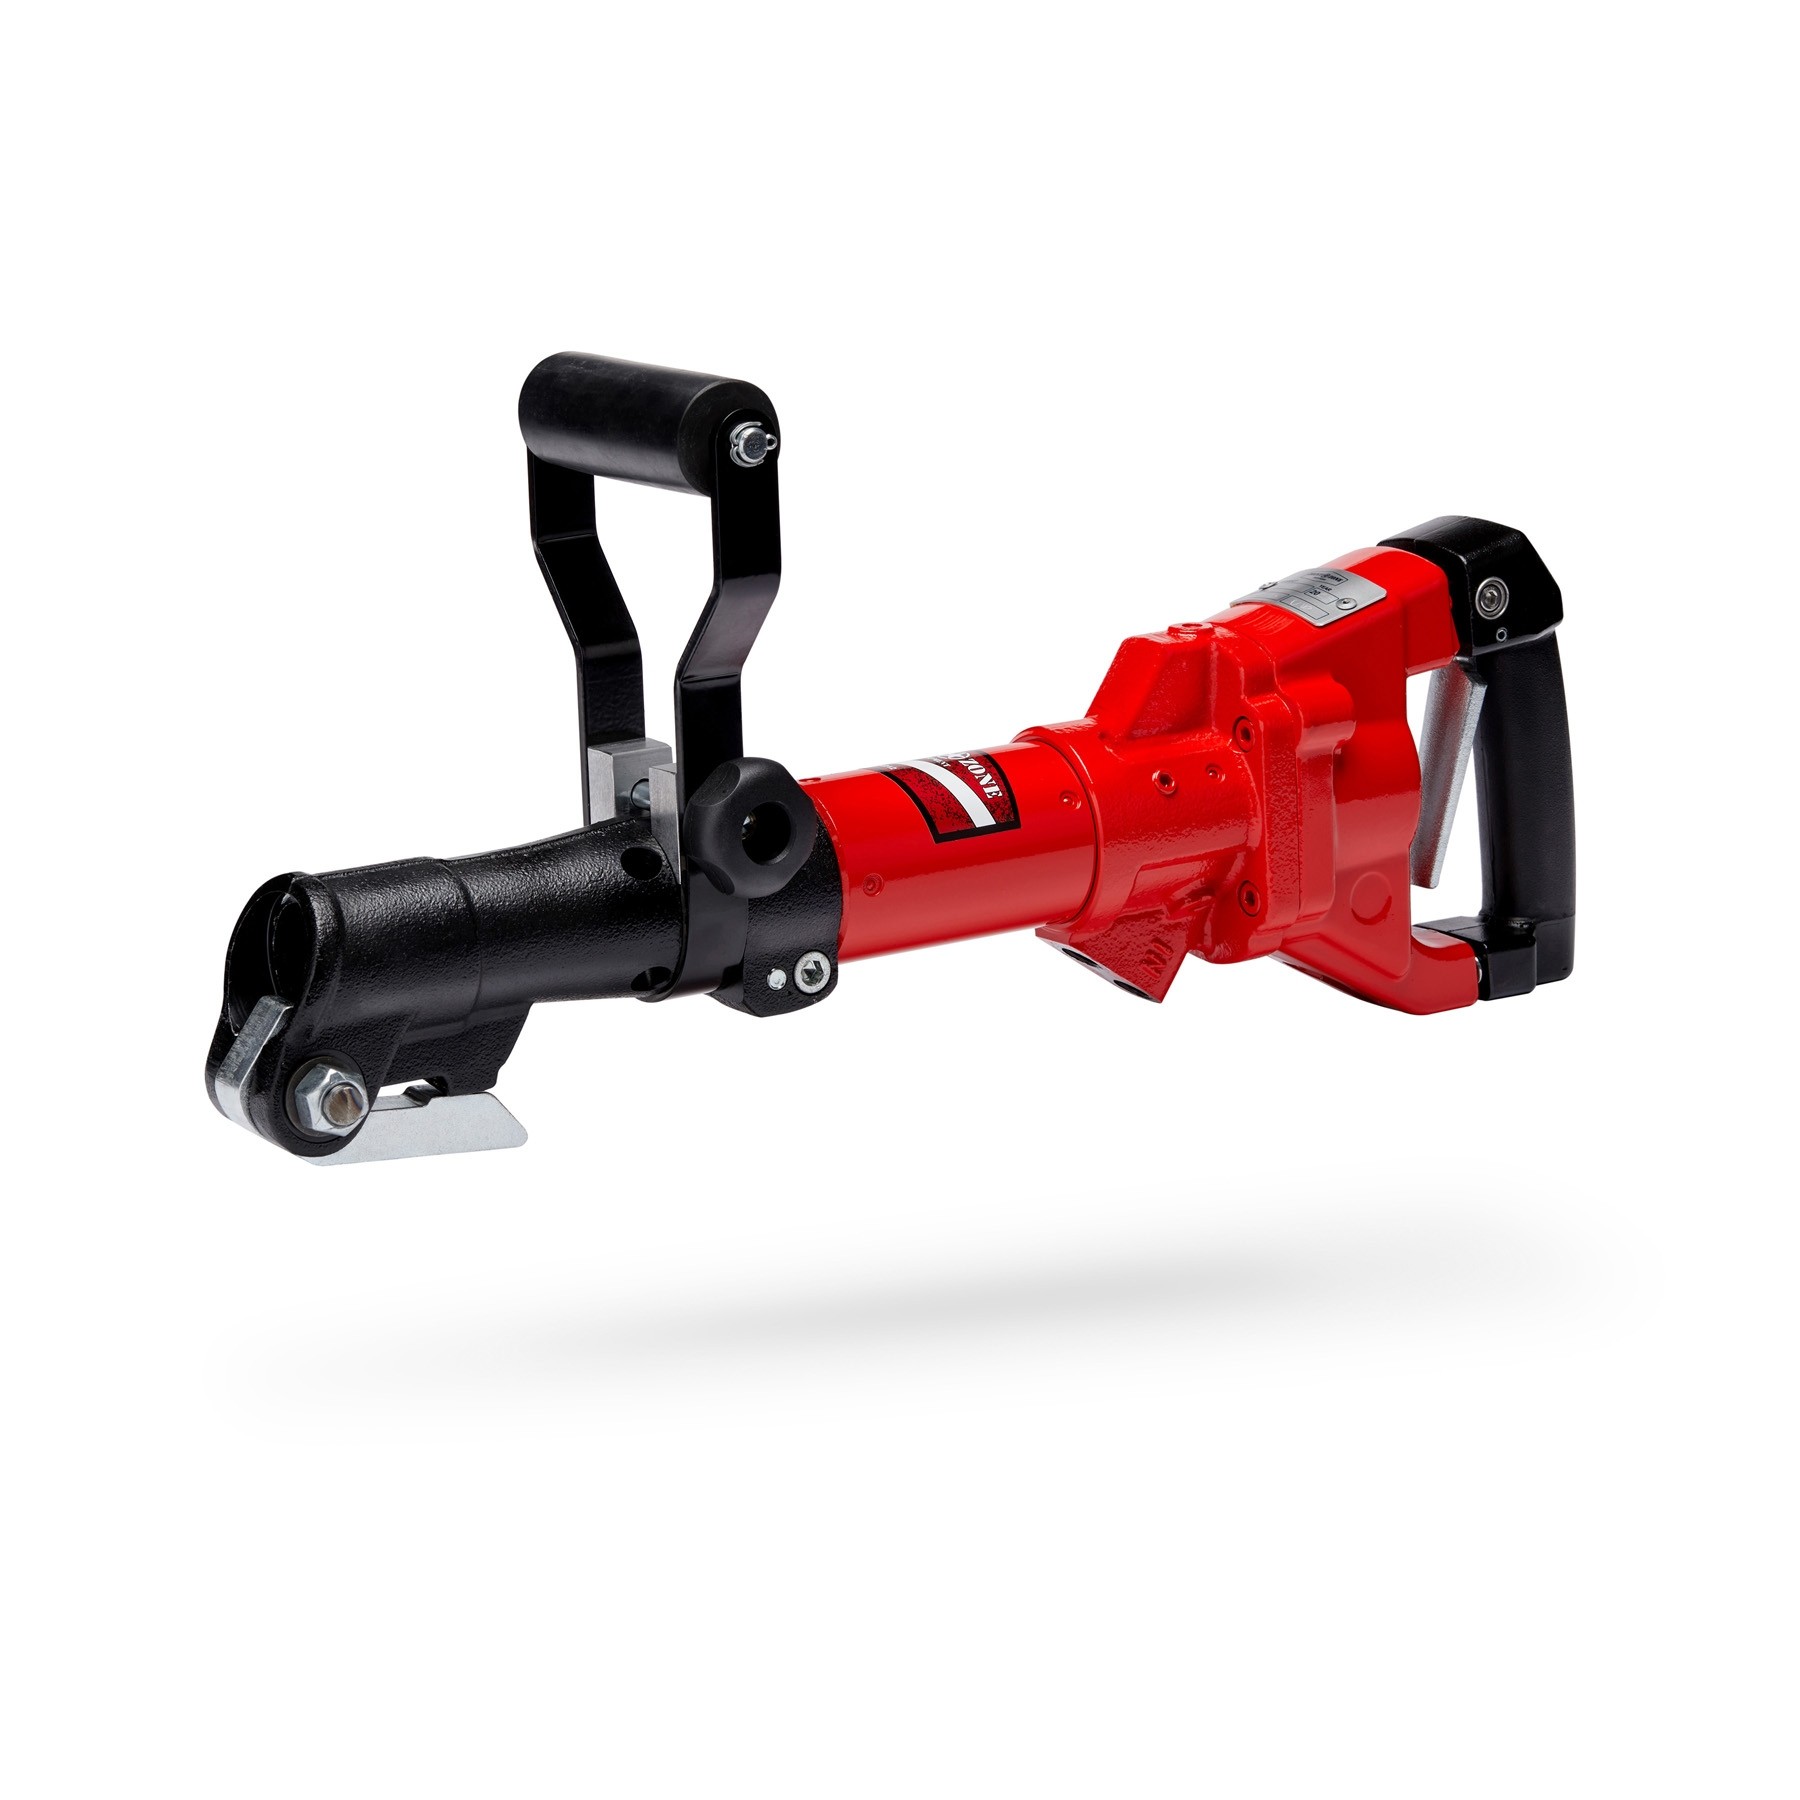 Joint Zone KD12 30lb Hydraulic Underwater Chipping Hammer